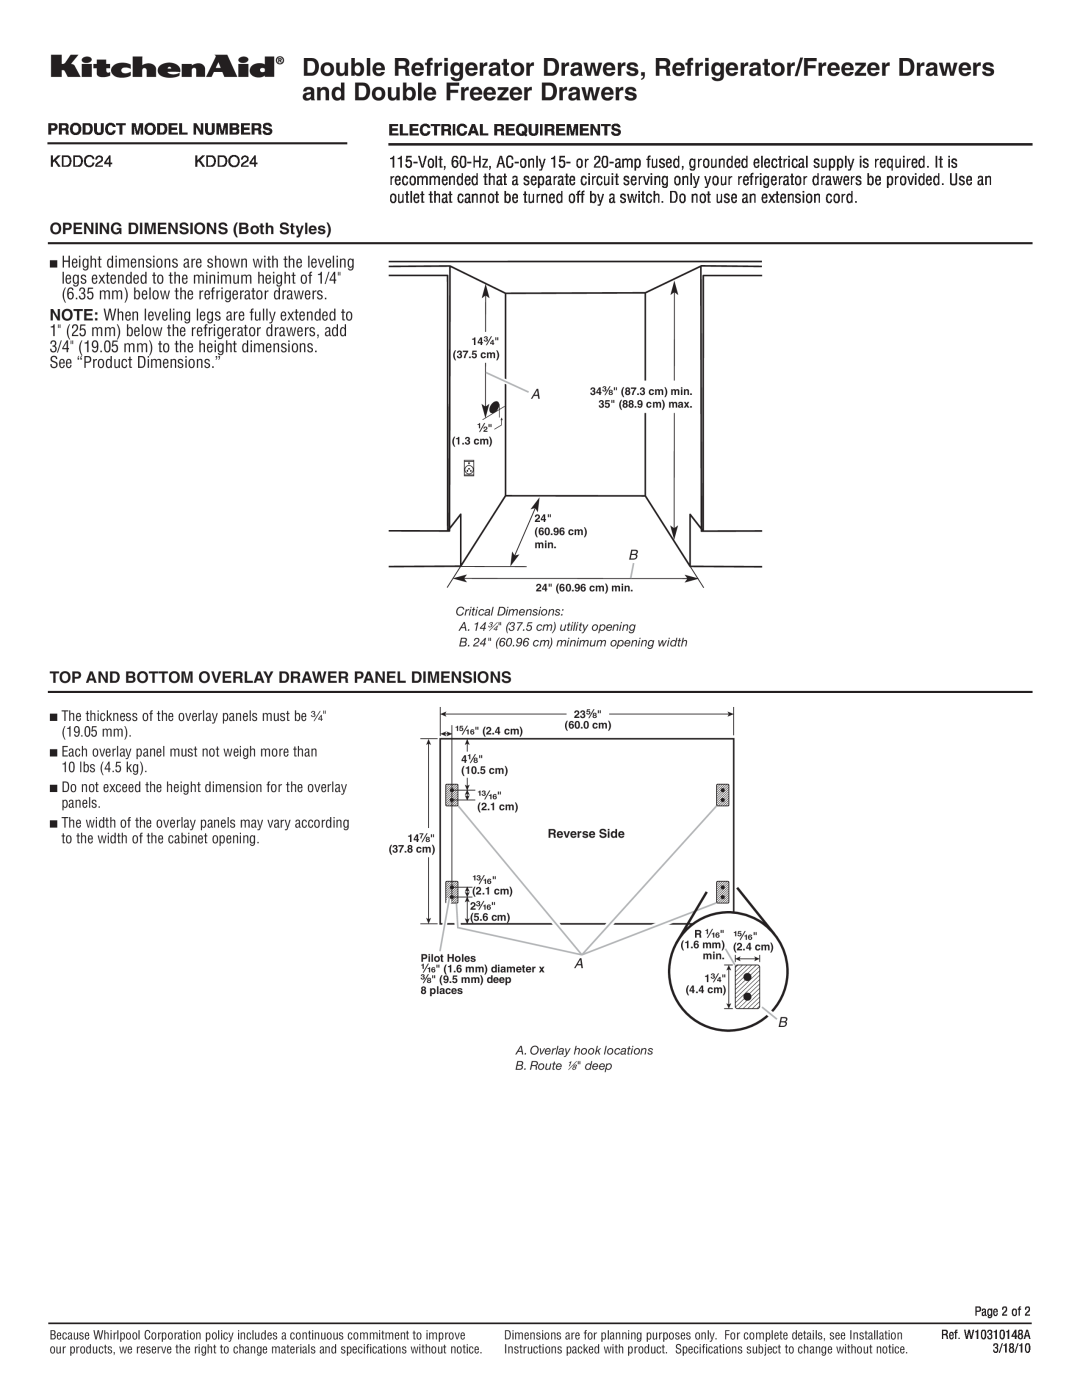 KitchenAid dimensions OPENING DIMENSIONS Both Styles, See “Product Dimensions.”, Product Model Numbers, KDDC24KDDO24 